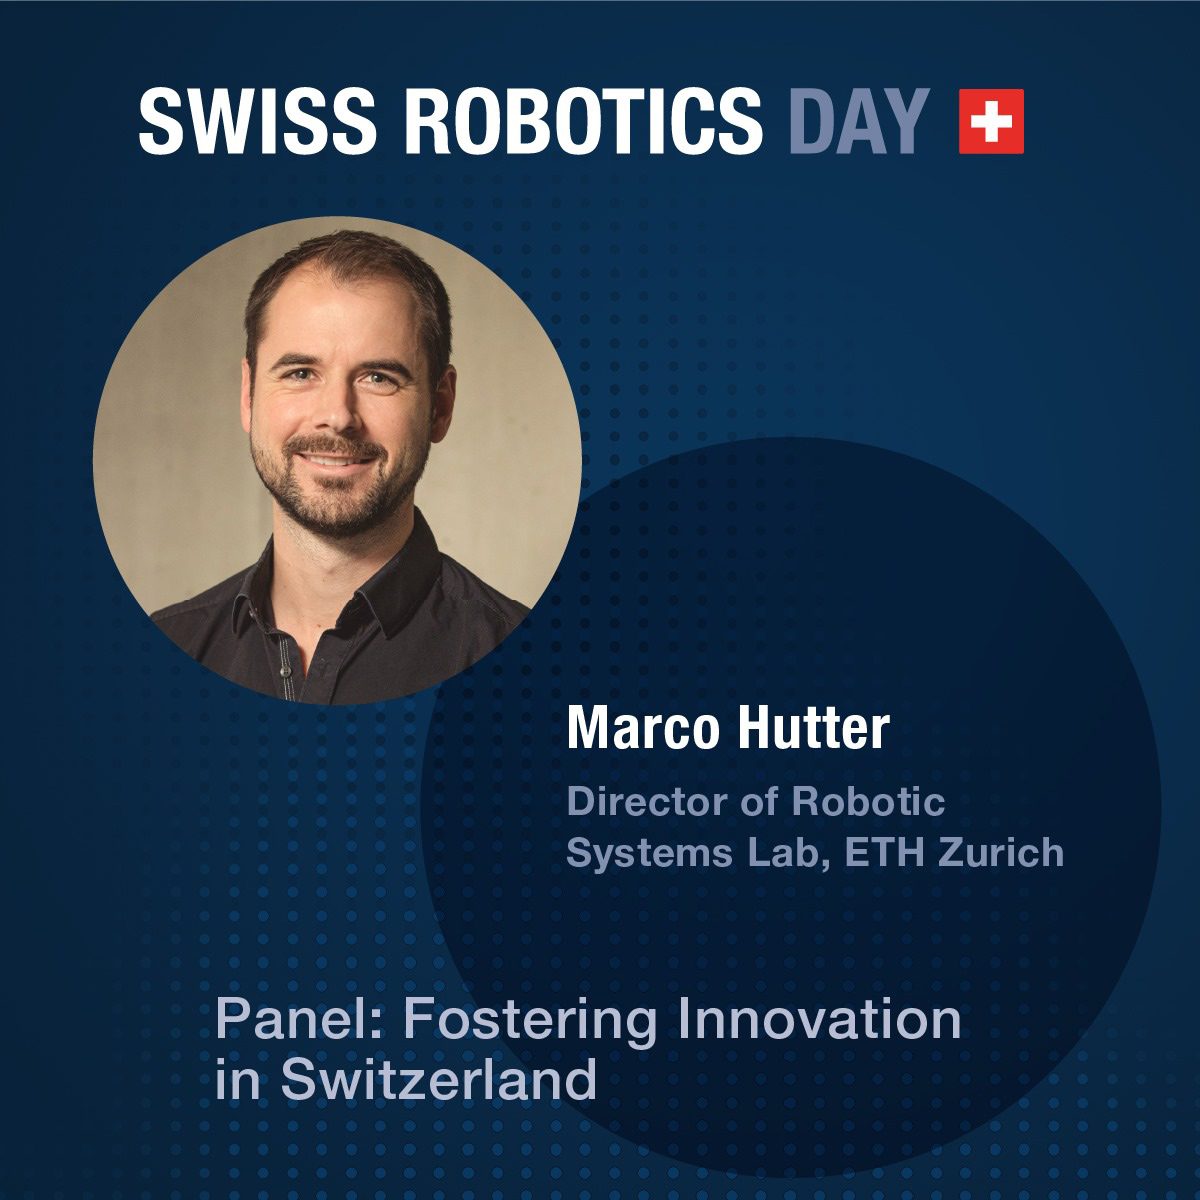 Marco is a professor for robotic systems and director of the center for robotics at ETH Zurich. His research interests are in the development of novel machines and machines and their intelligence to operate in rough and challenging environments. He is part of the National Centre of Competence in Research (NCCR) Robotics and NCCR Digital Fabrication and PI in various international projects (e.g. EU NI, DigiForest) and challenges. Moreover, Marco is co-founder of several ETH Startups such as ANYbotics AG or Gravis Robotics AG, targeting the commercialization of legged robots and autonomous construction equipment.